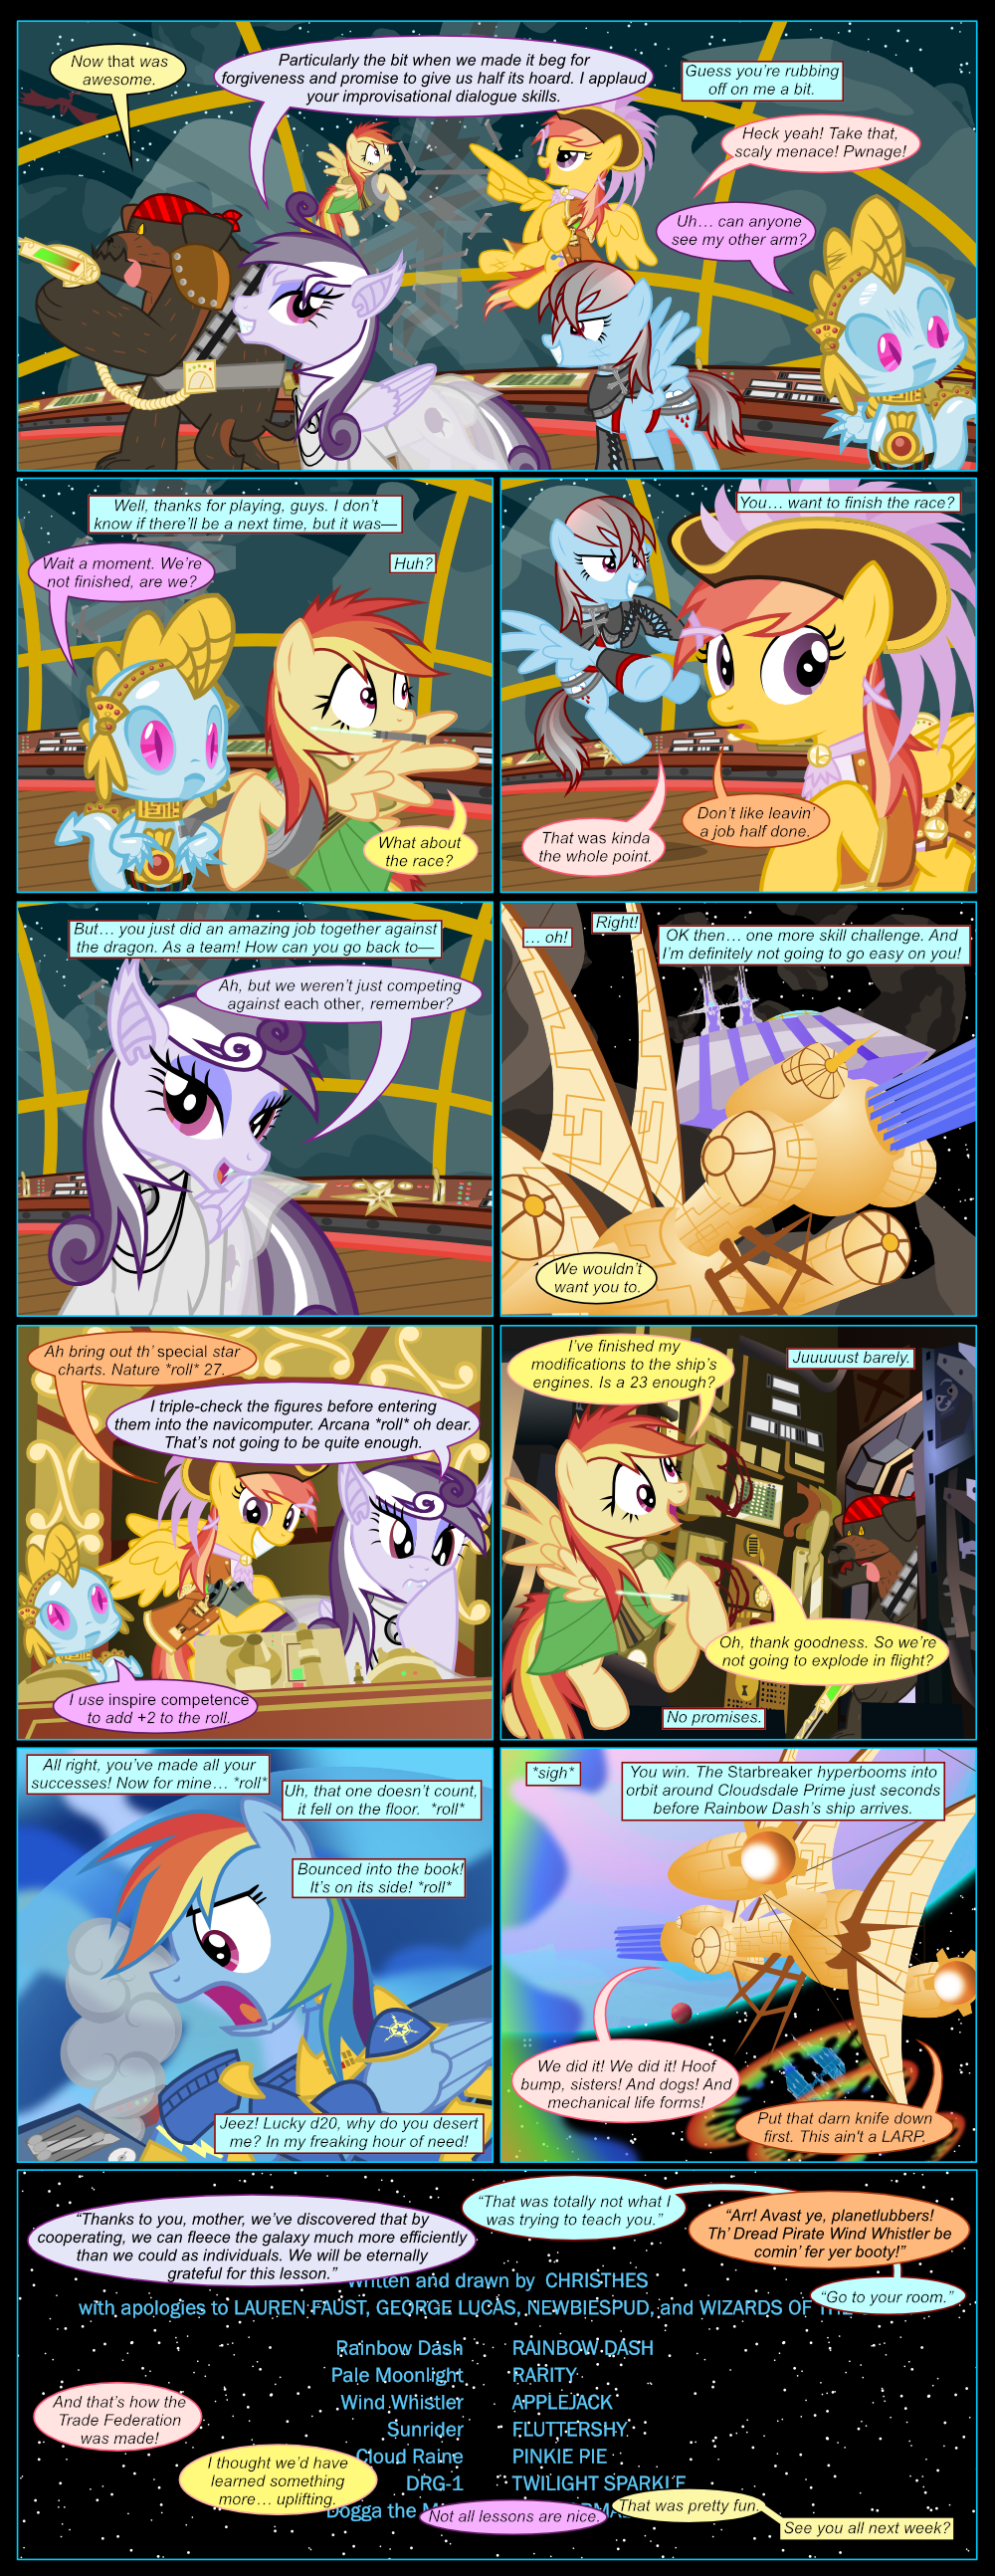 Tails of Empire, Part 5